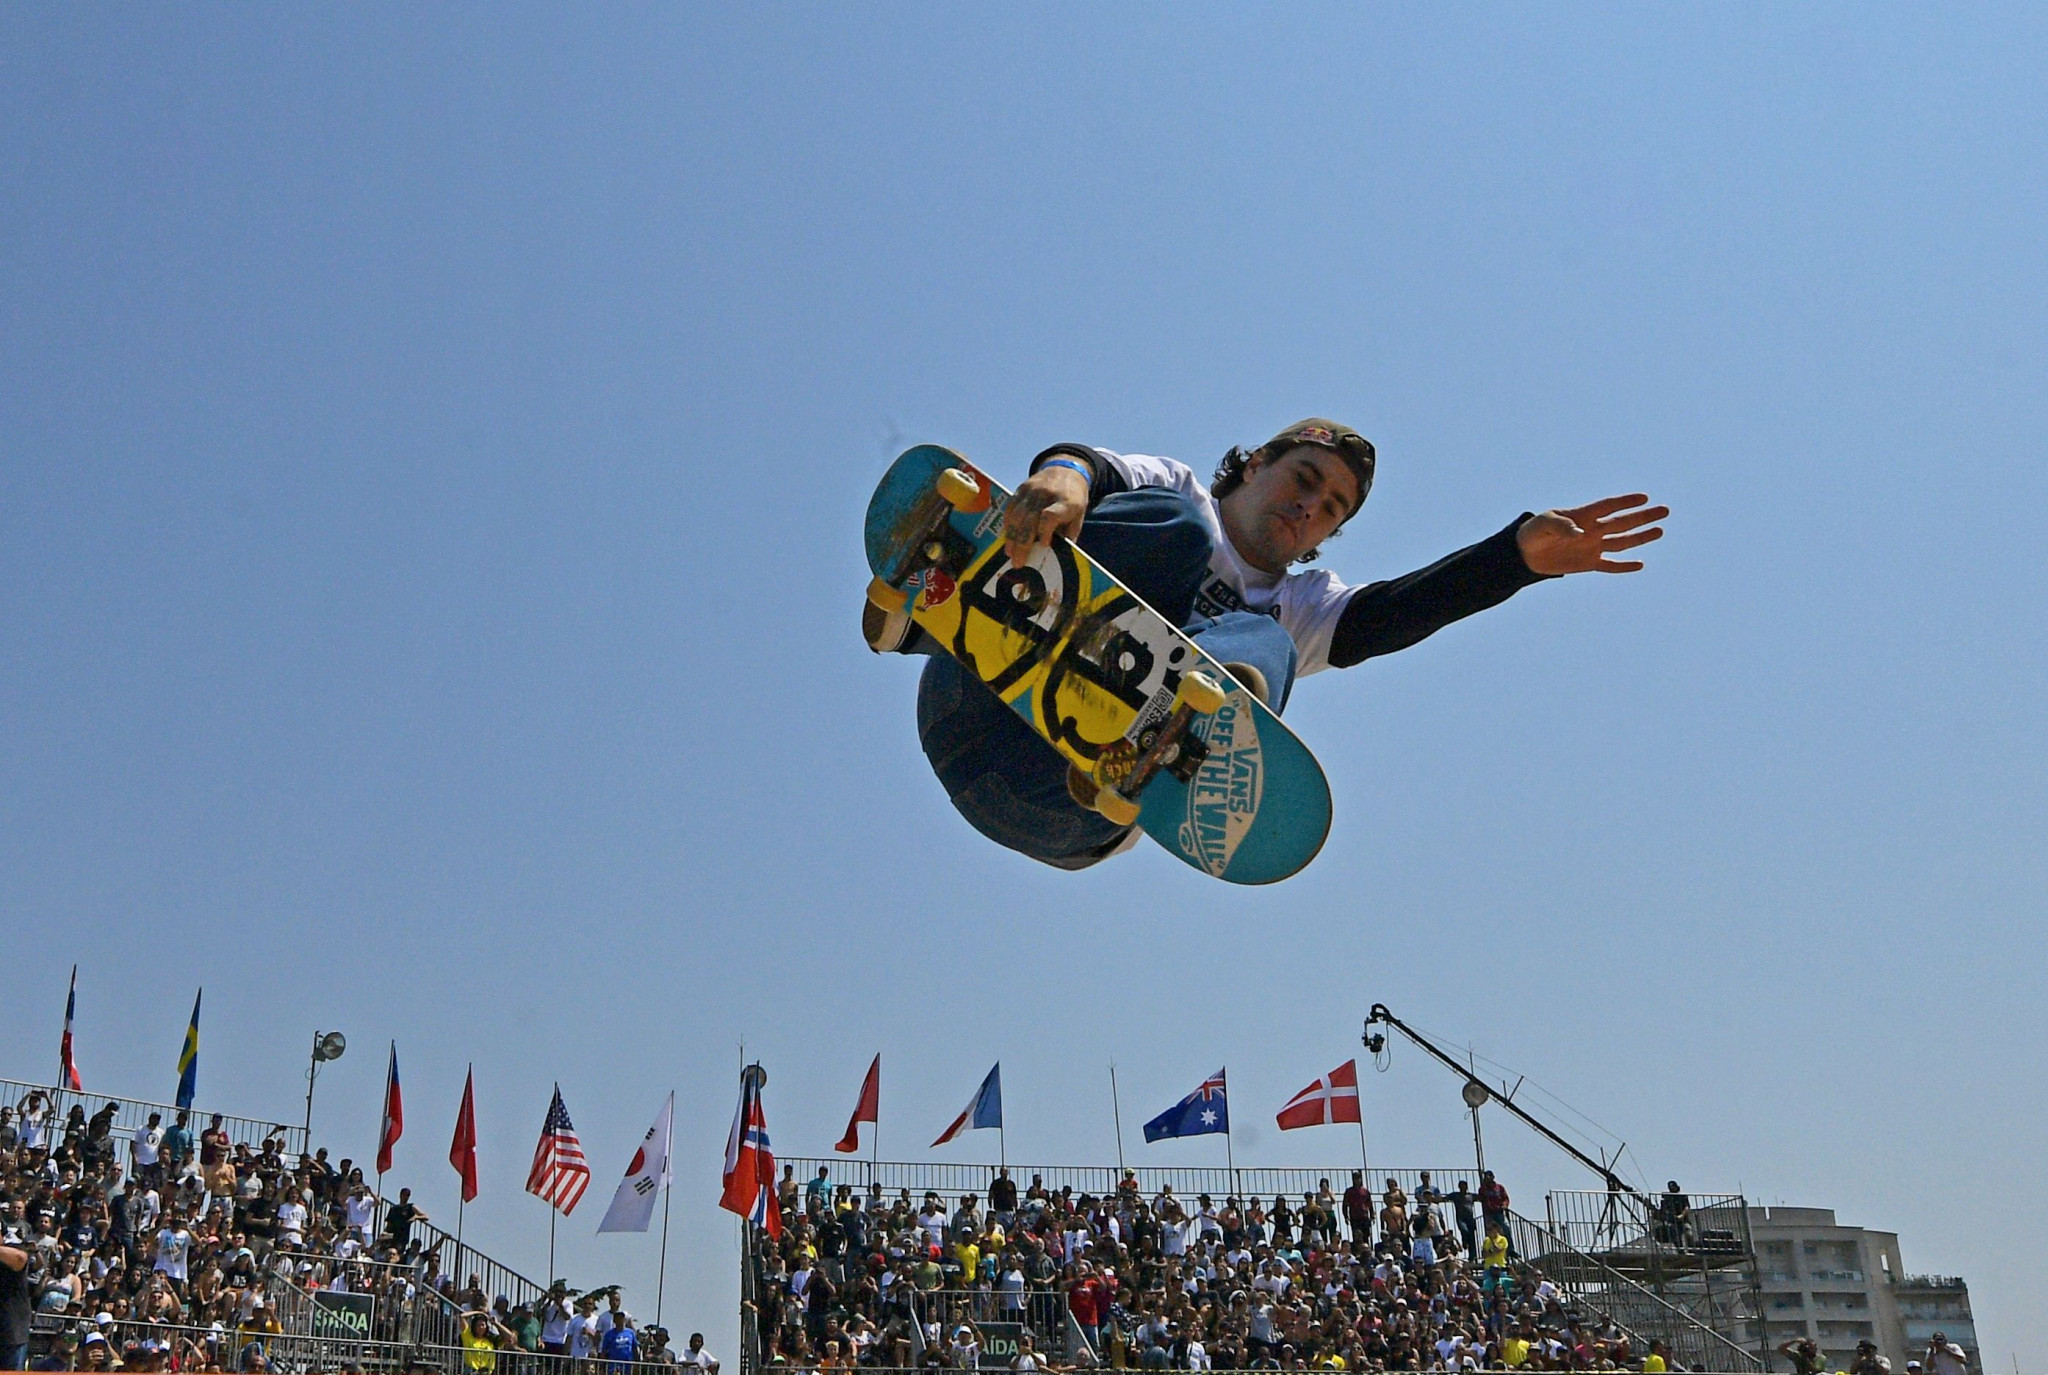 Skateboarding is due to make its Olympic debut at Tokyo 2020 ©Getty Images